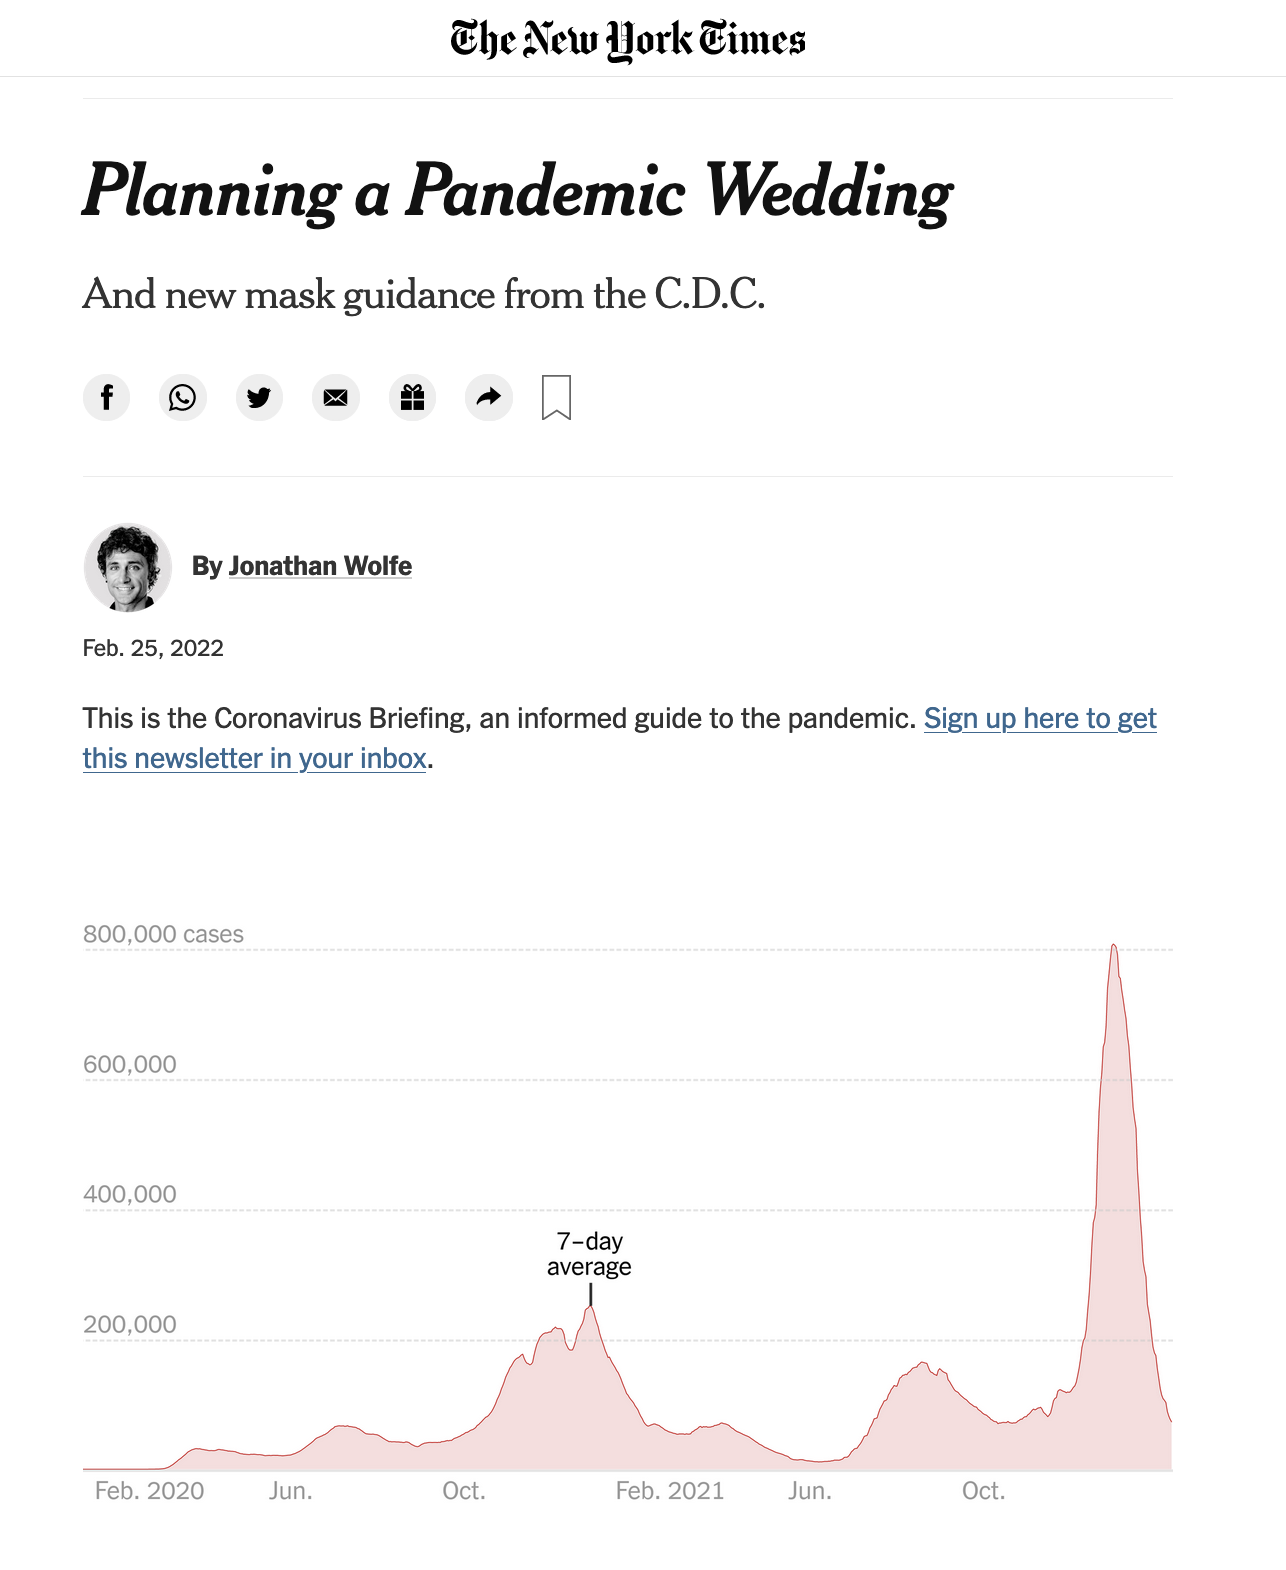 nytimes planning a pandemic wedding.png